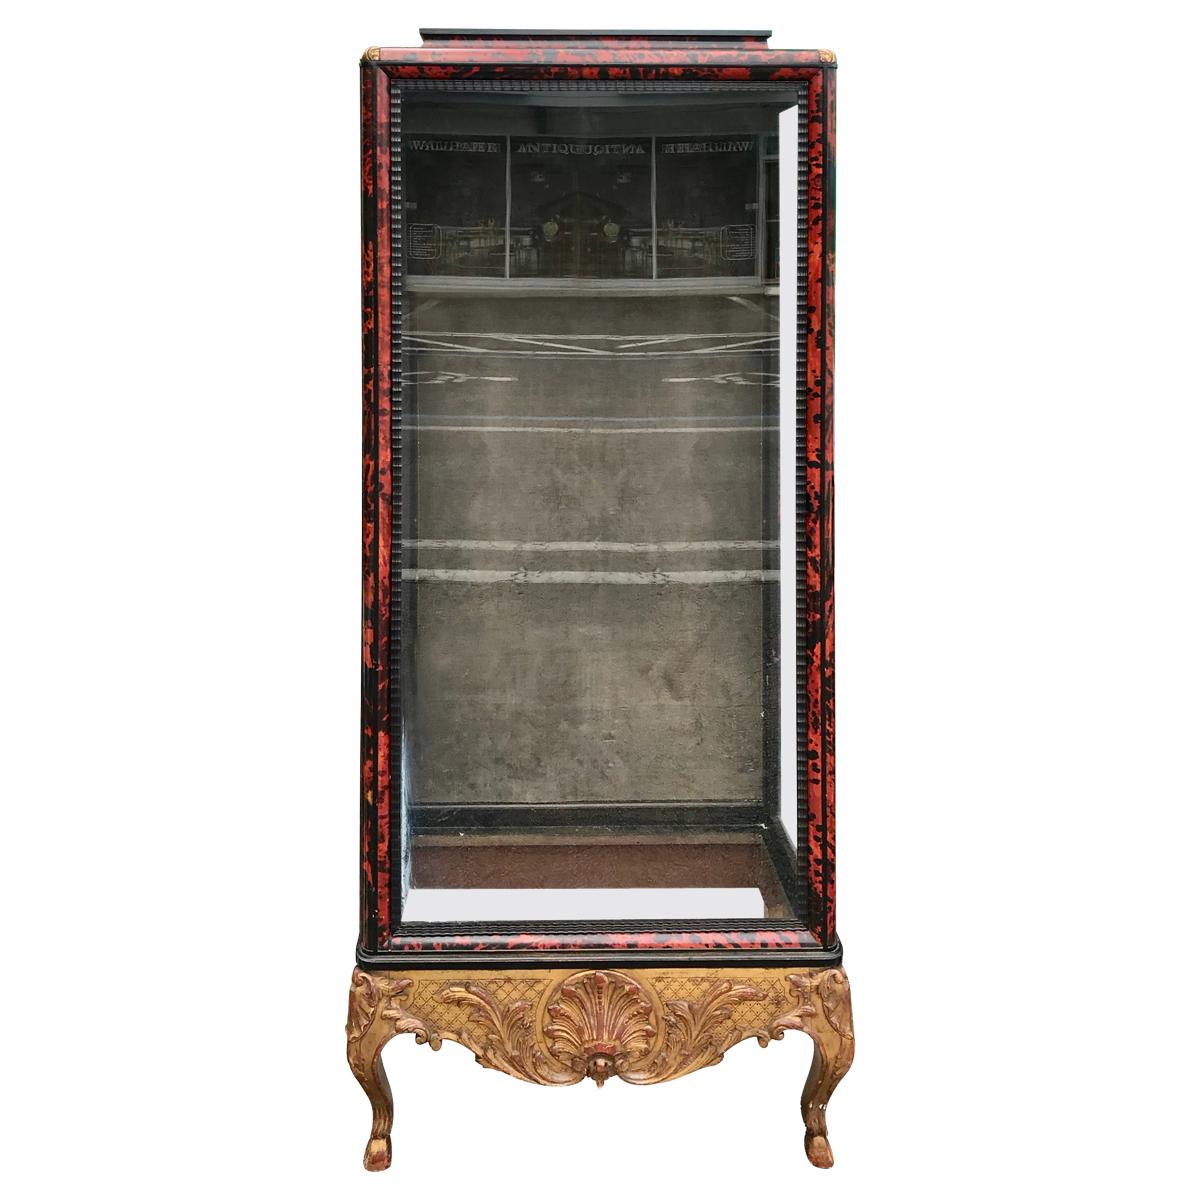 19th Century English Red "Tortoiseshell" and Giltwood Display Cabinet